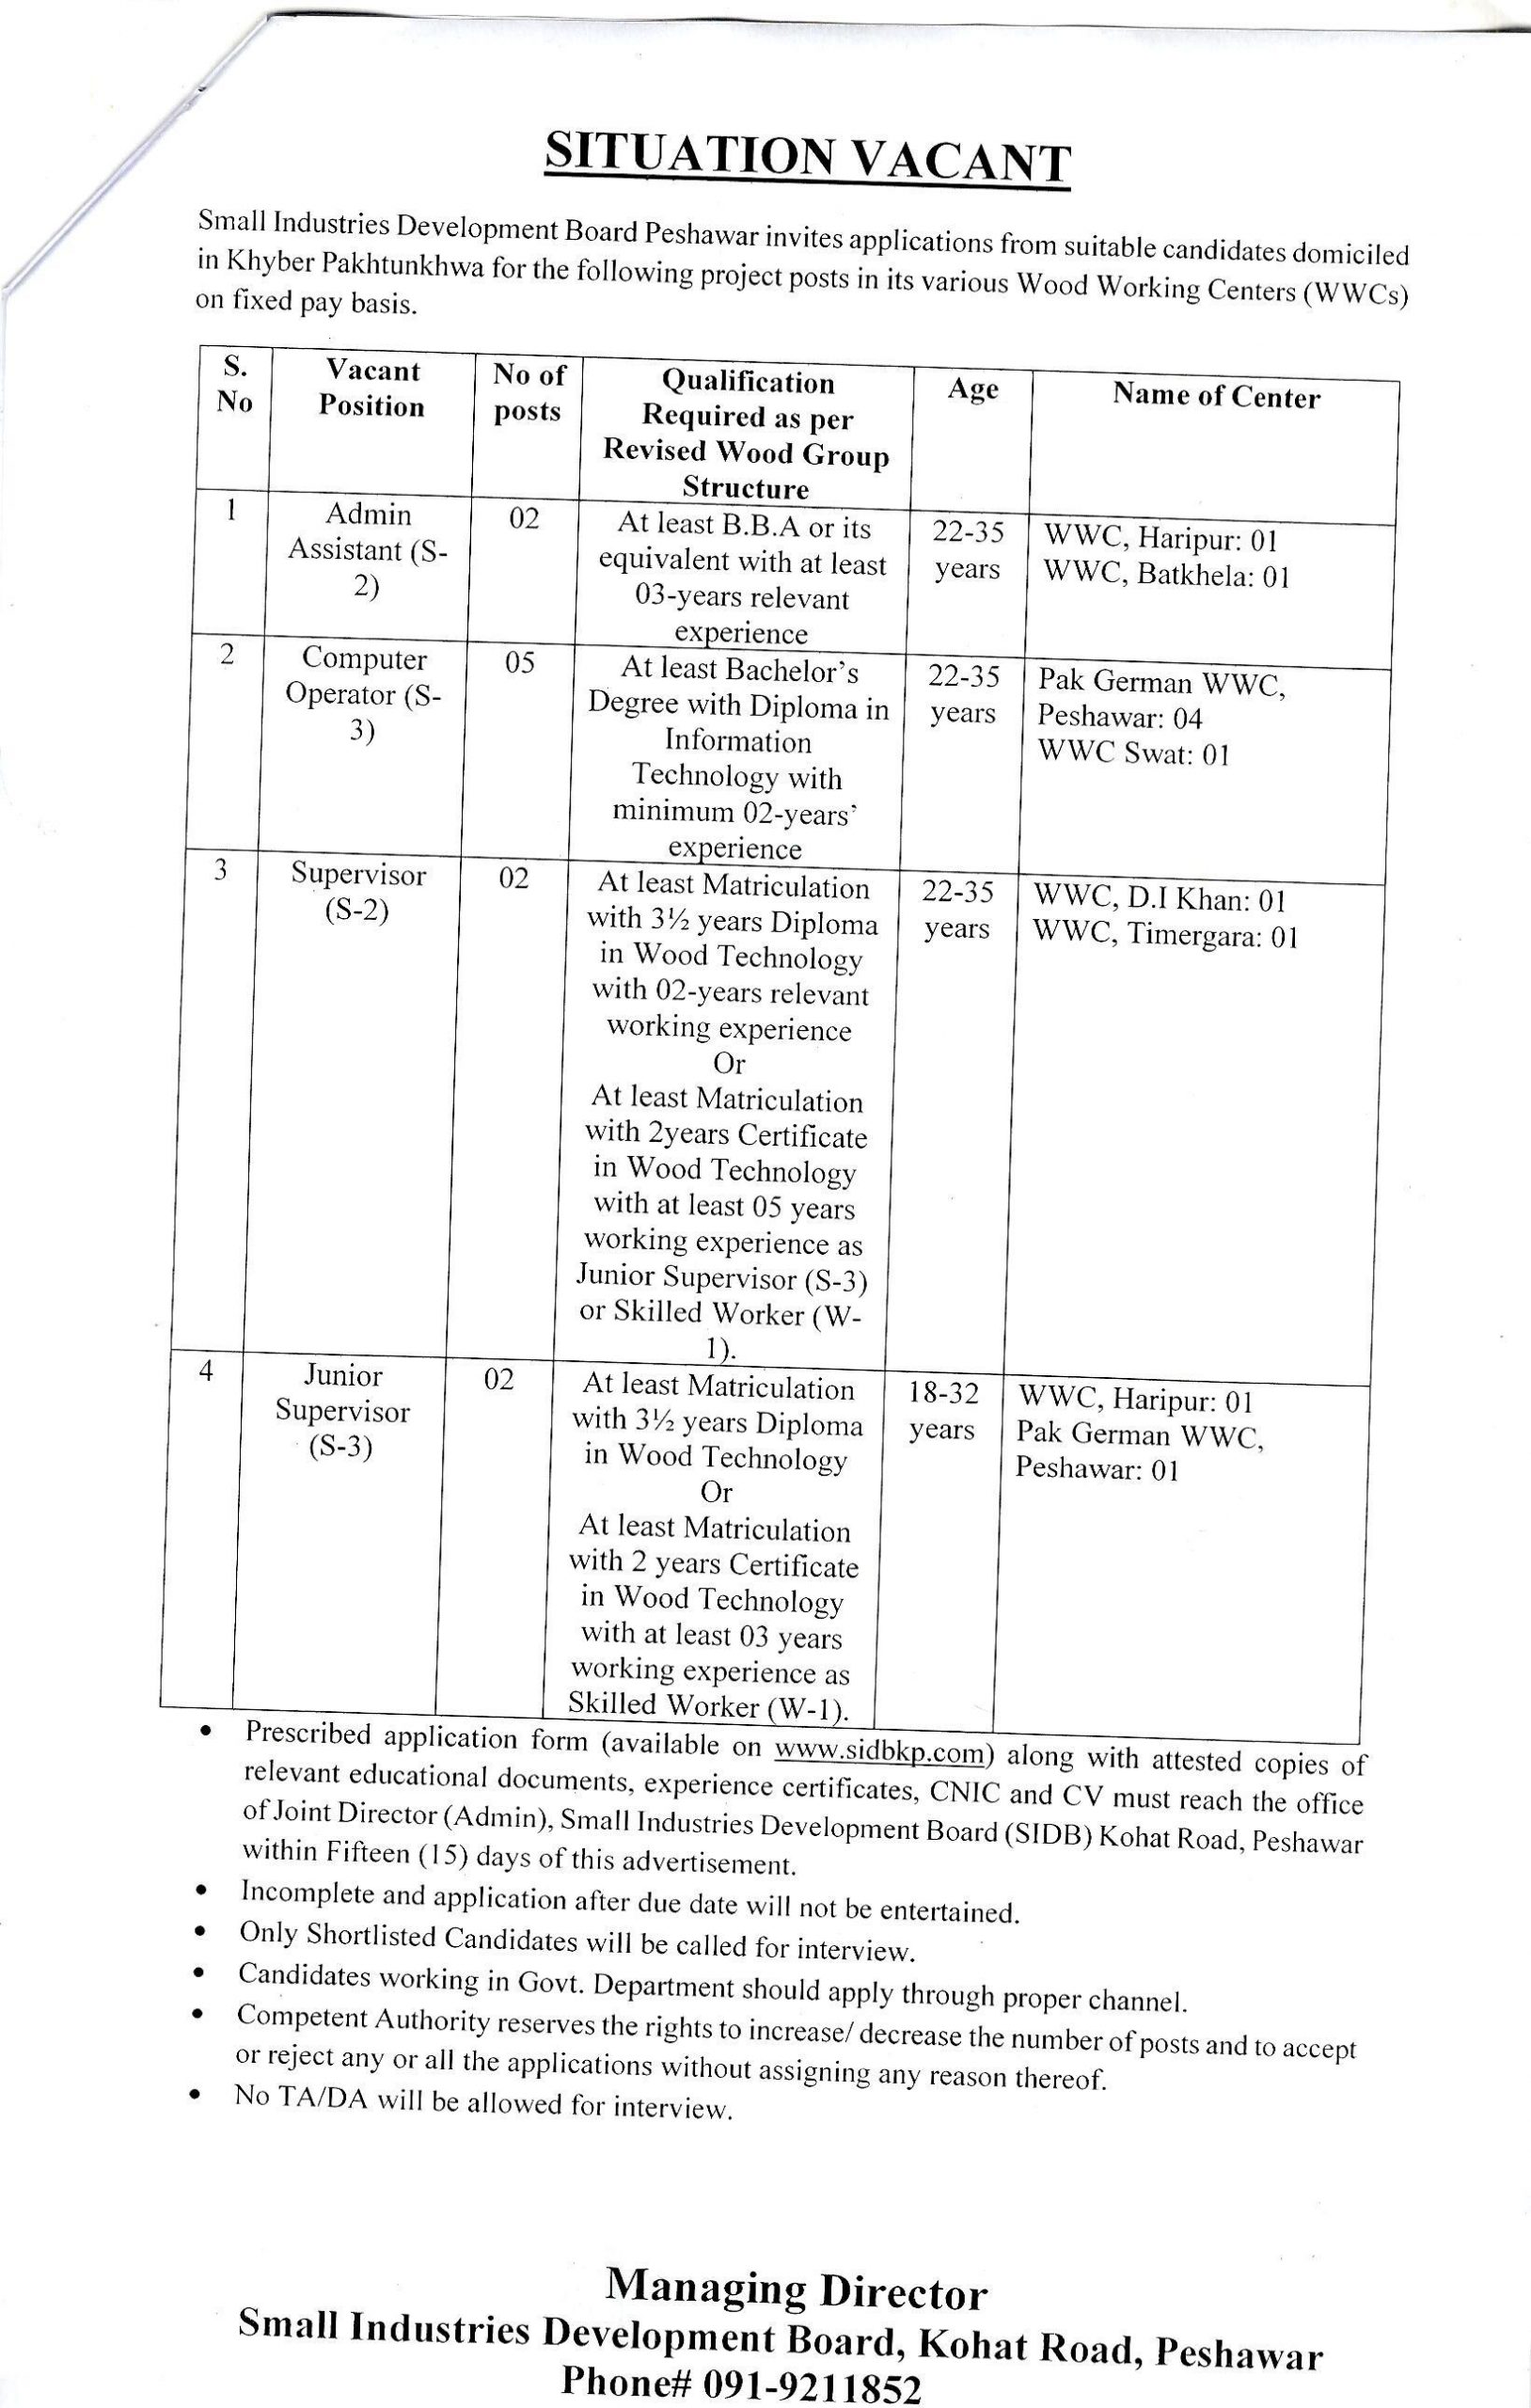 Vacancies Announcement in SIDB Wood Working Centers (WWCs),